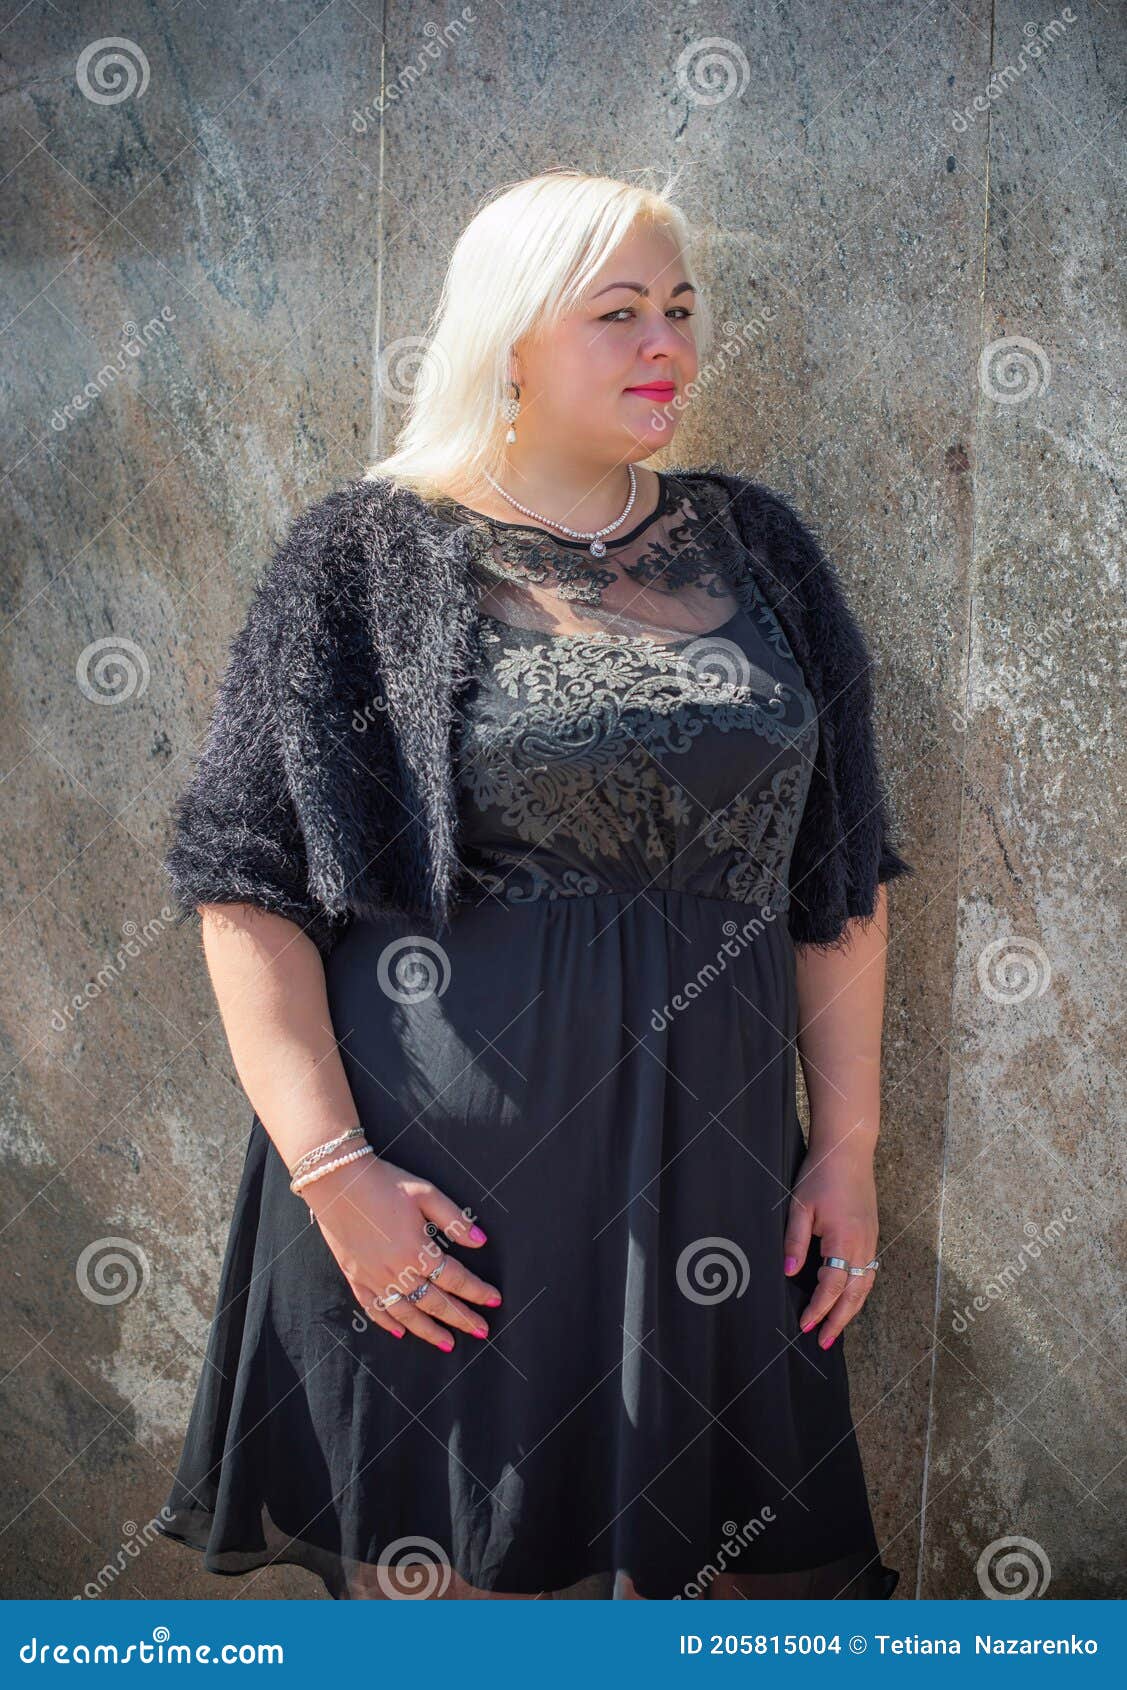 Plus Size European Lady at City, Lifestyle Chubby People Stock